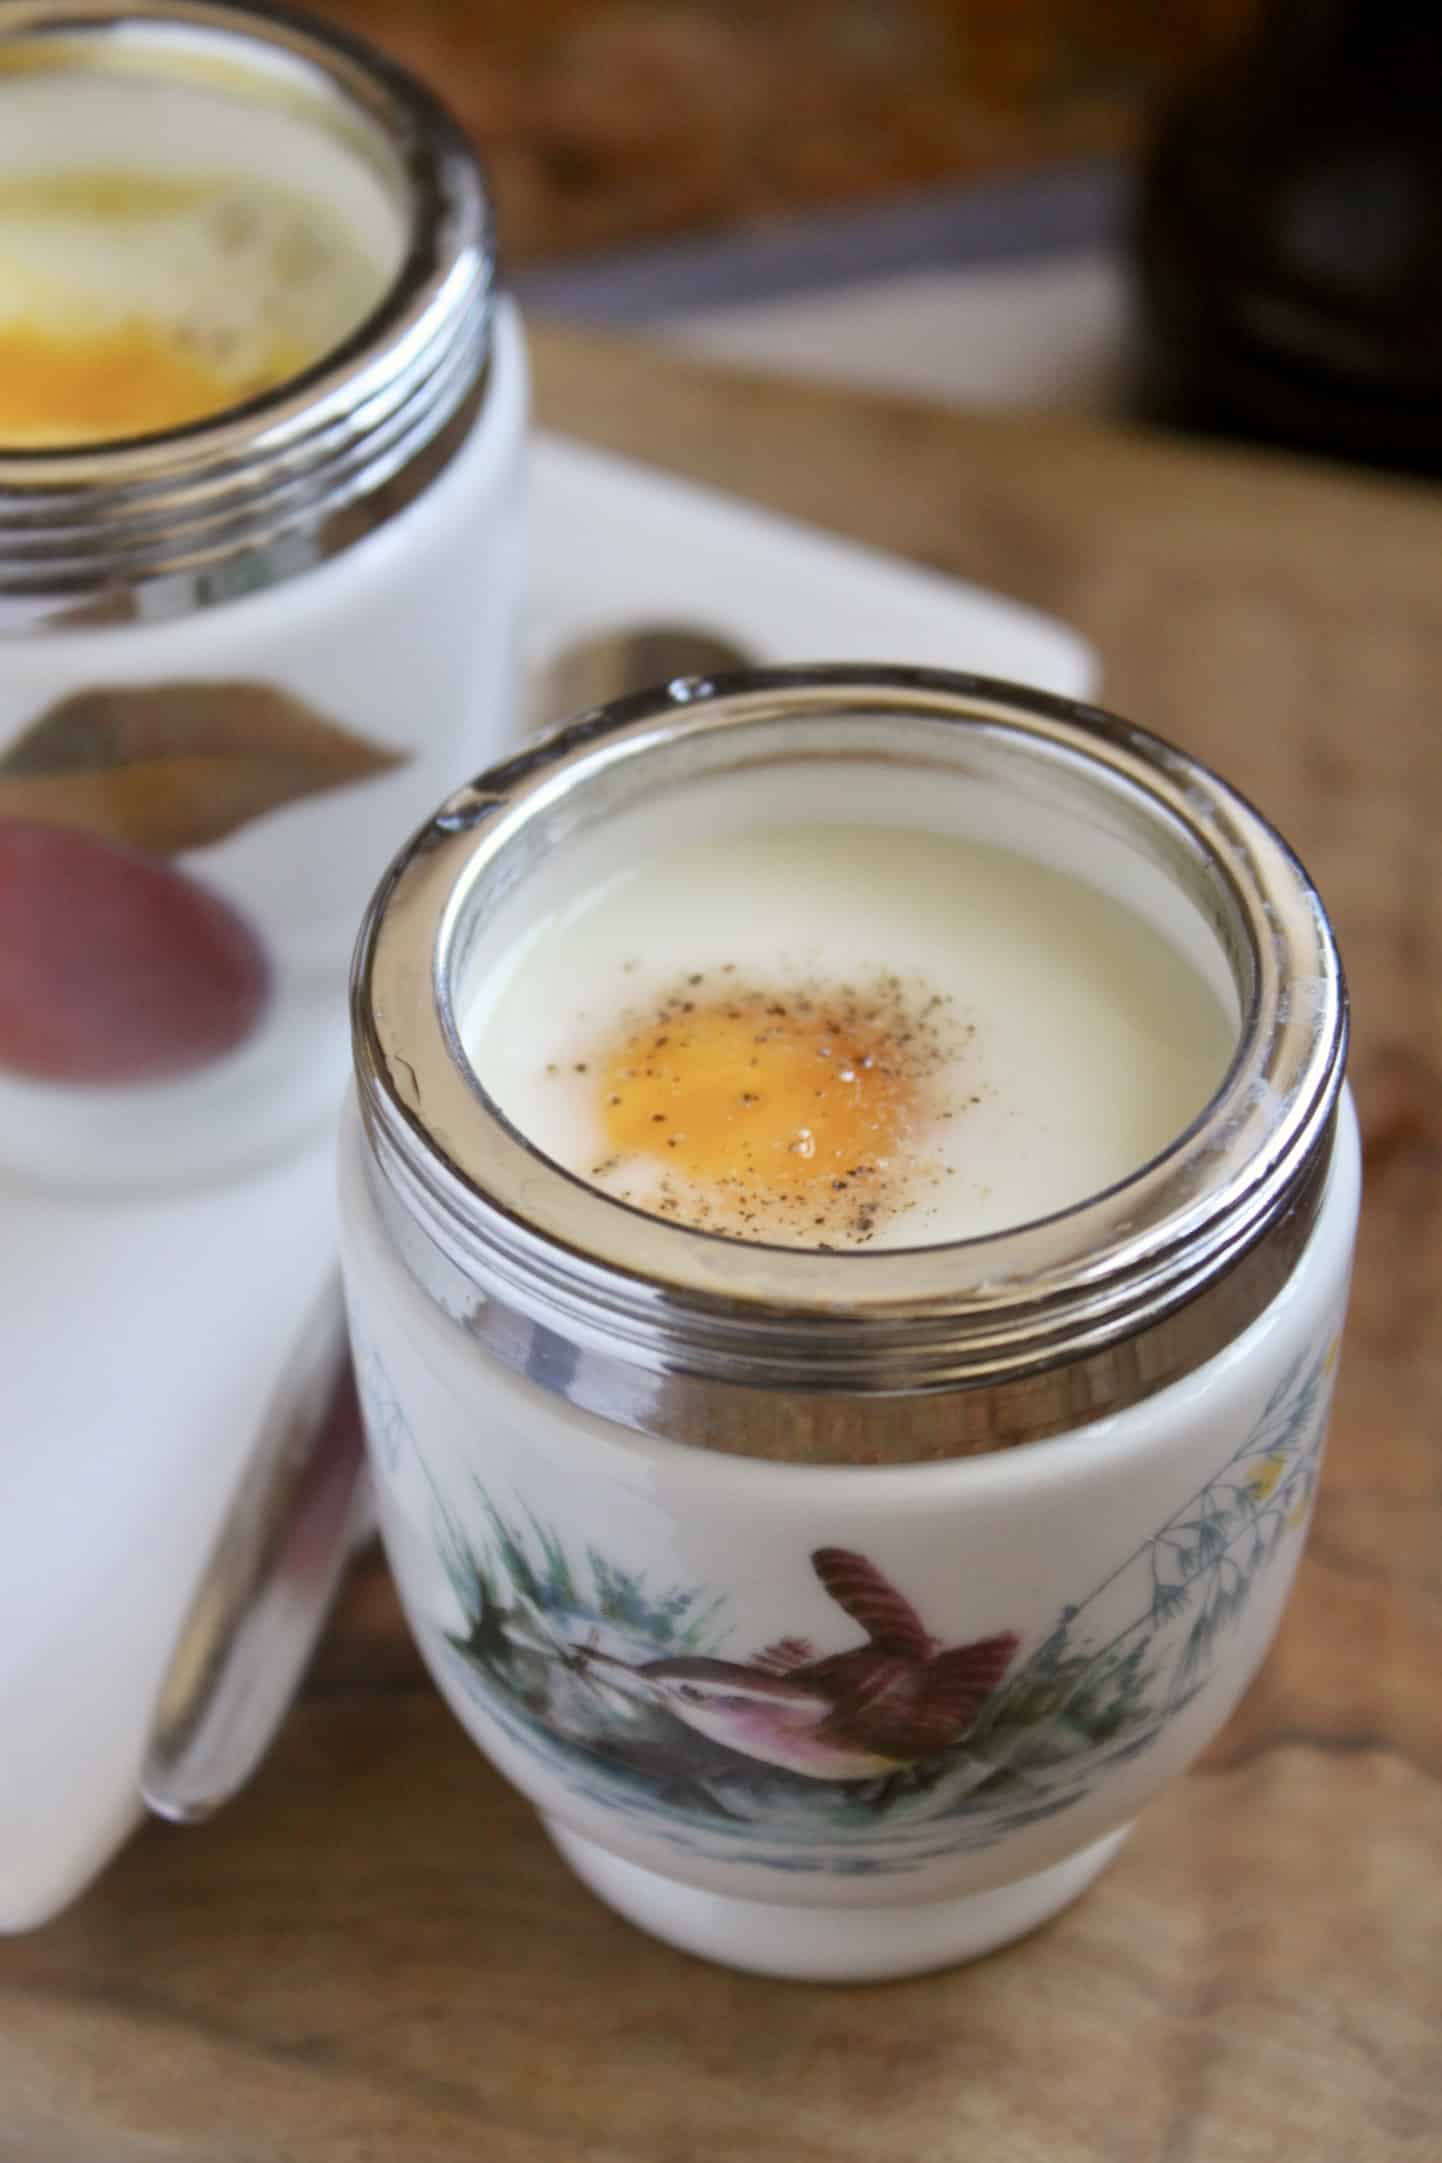 Coddled Eggs-An Eggcellent Way to Start Your Morning - The Teacup